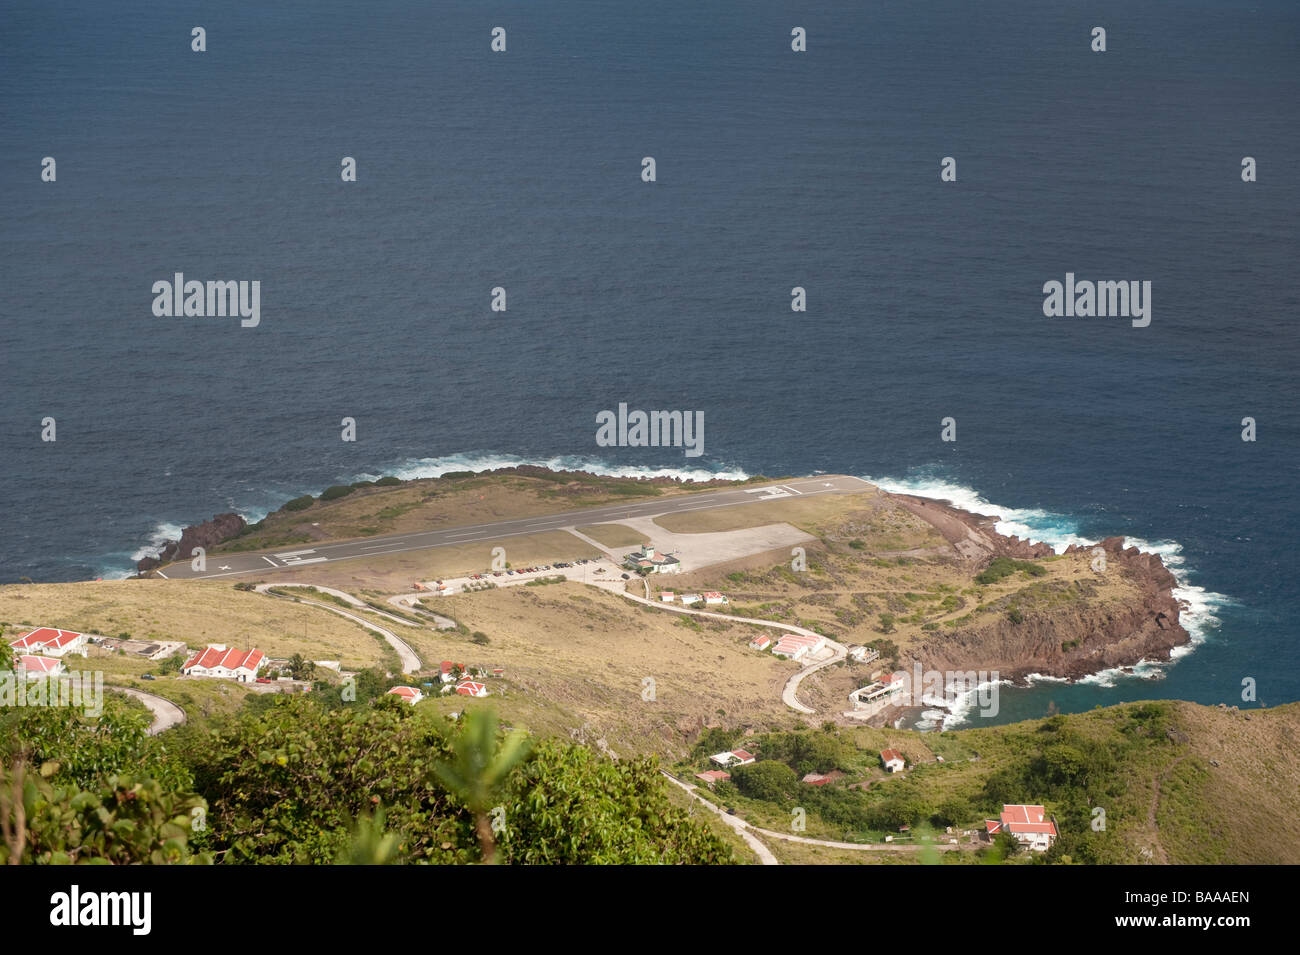 Juancho E. Yrausquin Airport  on Saba seen from the Road above Stock Photo